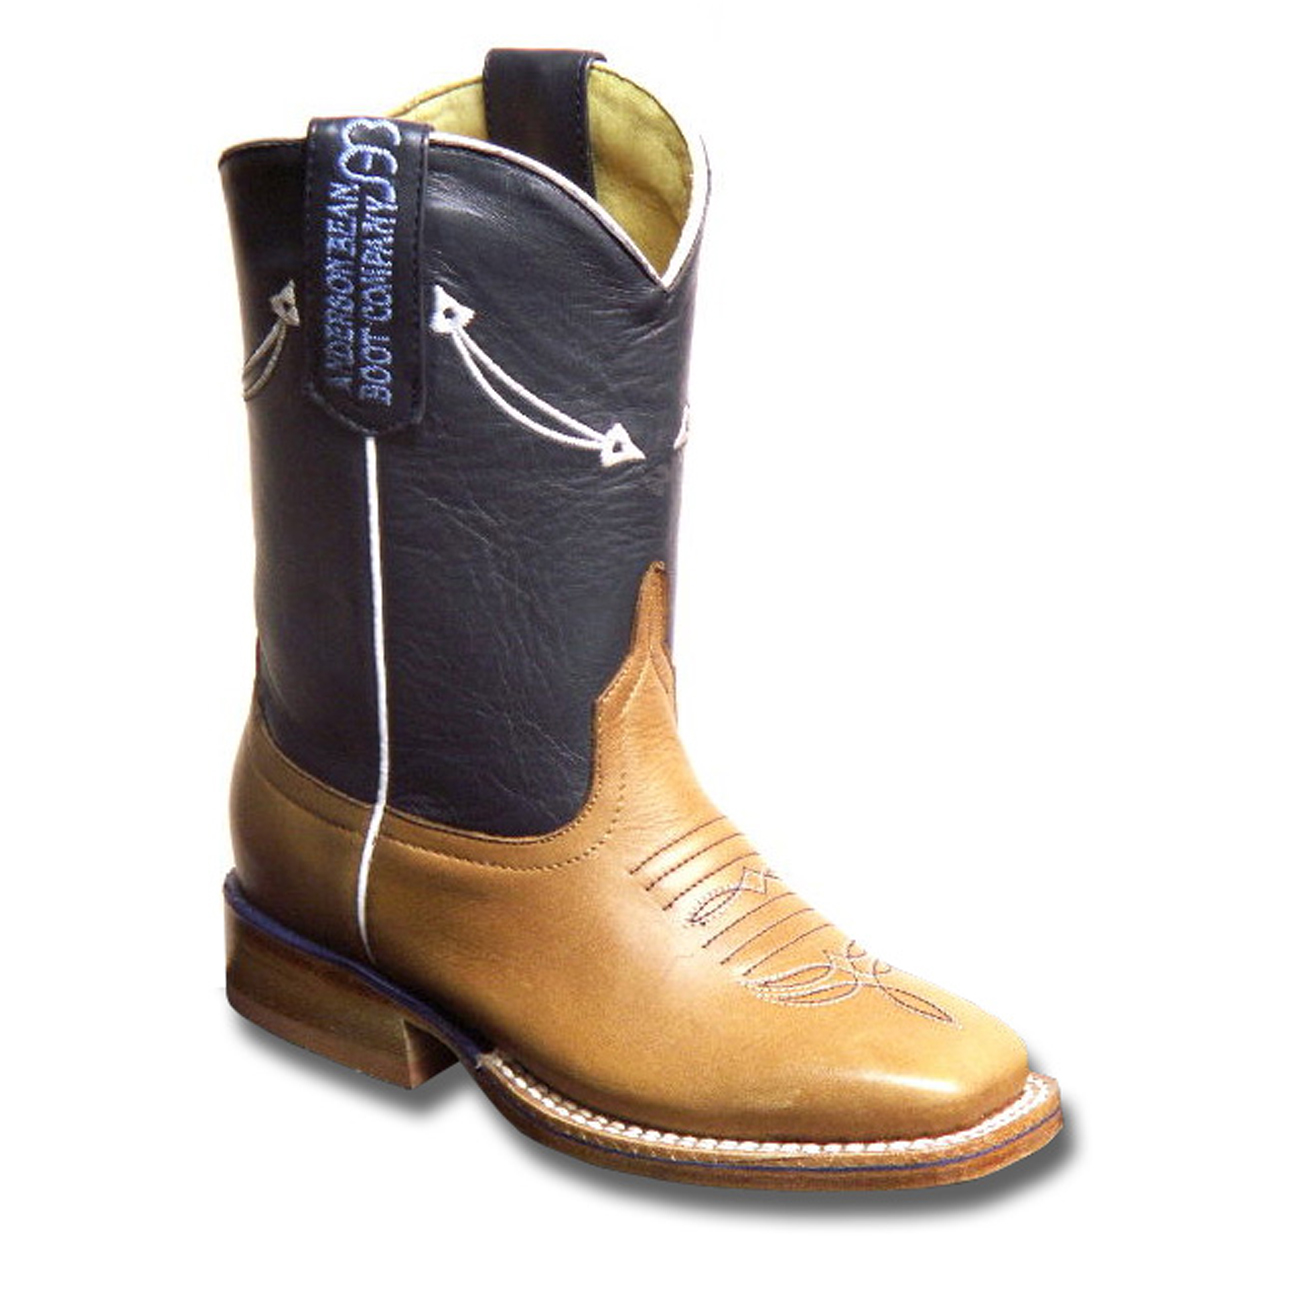 Buy > horse boots kids > in stock